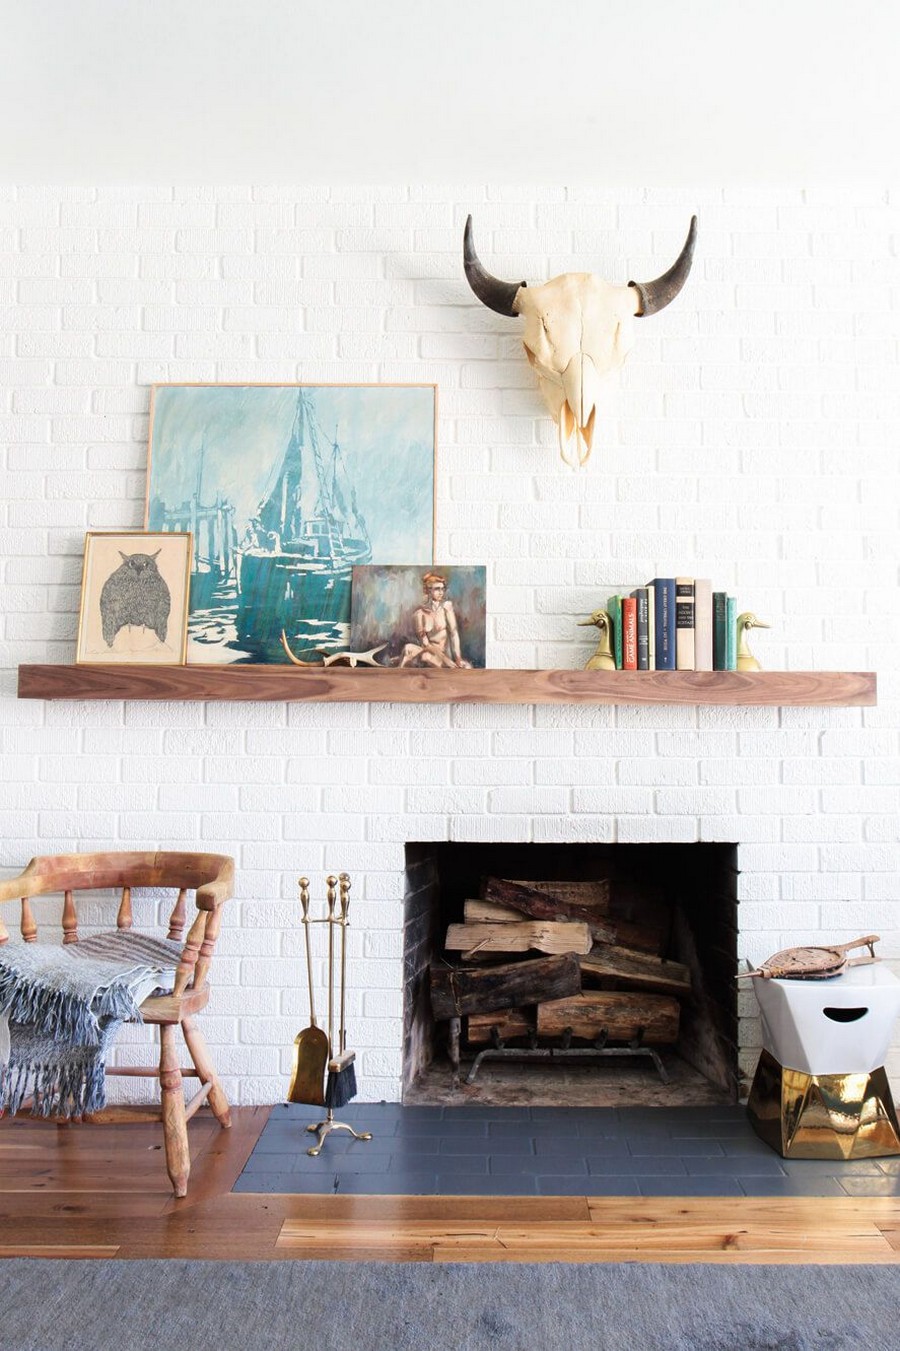 7 Interior Design Ideas To Highlight The Fireplace In Your Living Room